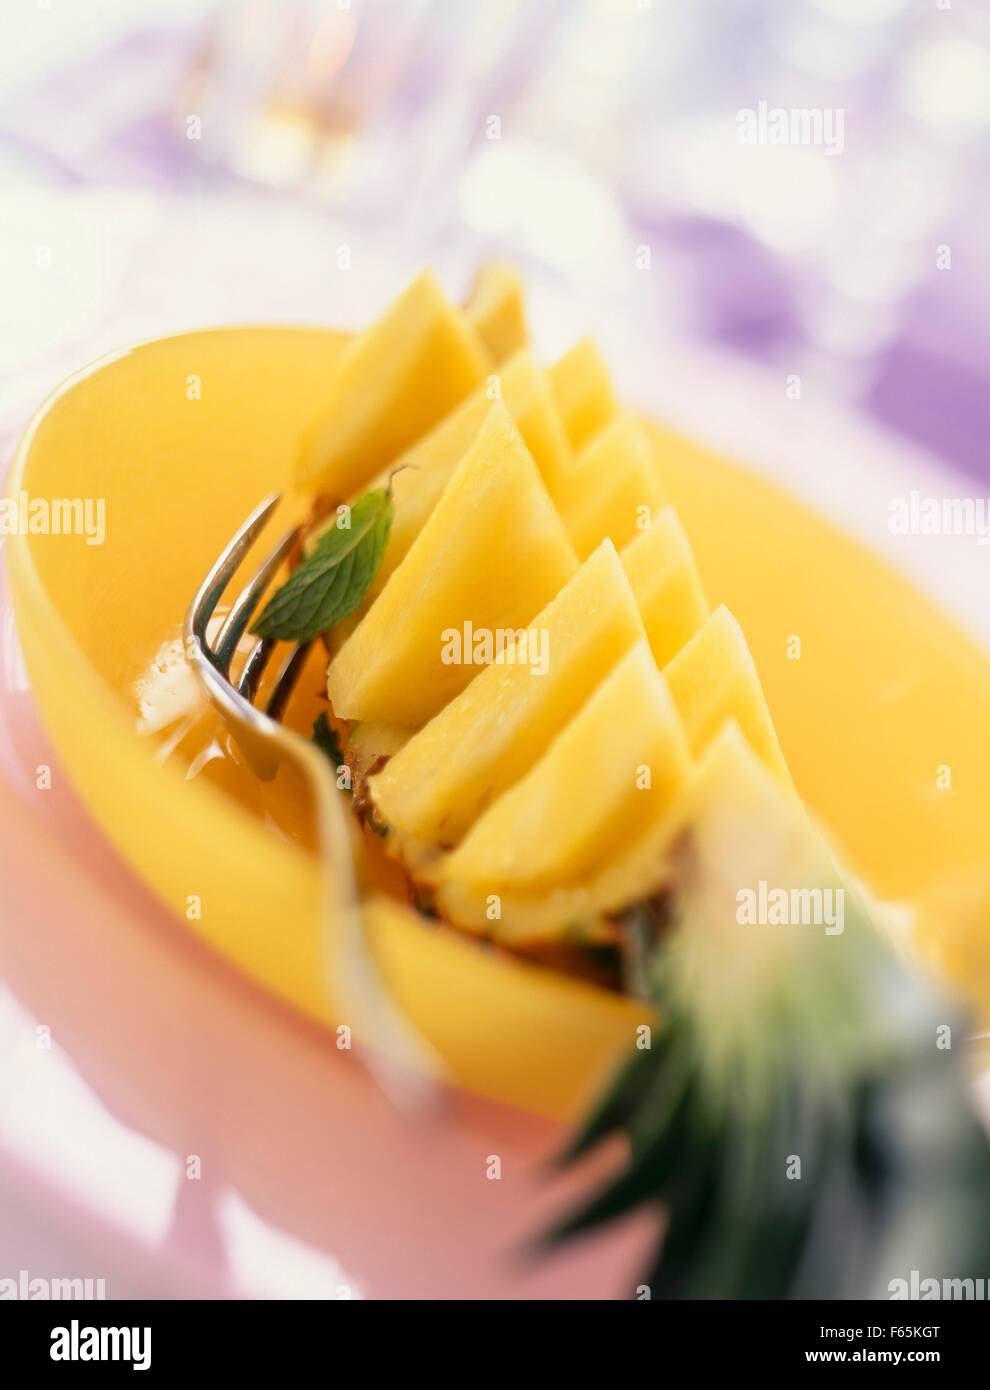 quarter of a pineapple cut in slices Stock Photo